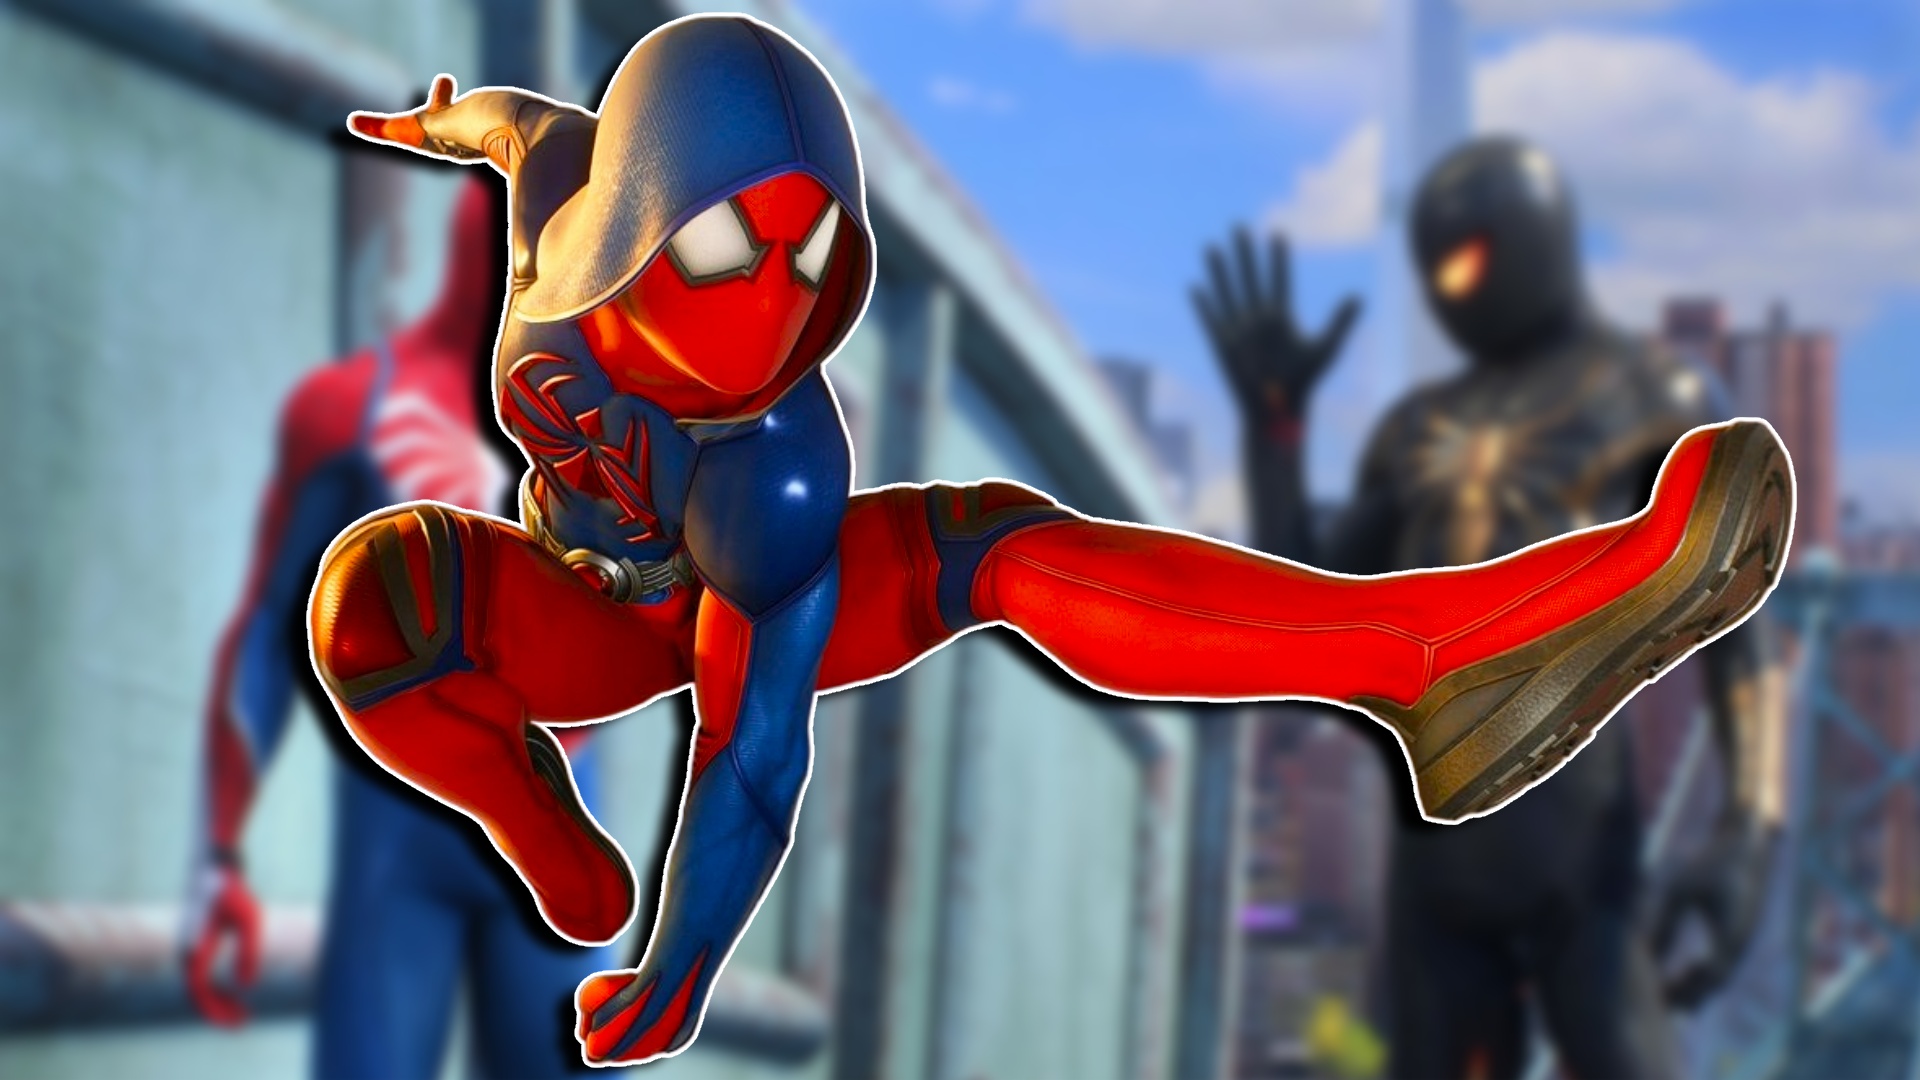 Marvel's Spider-Man 2: Every Main Character and Voice Actor